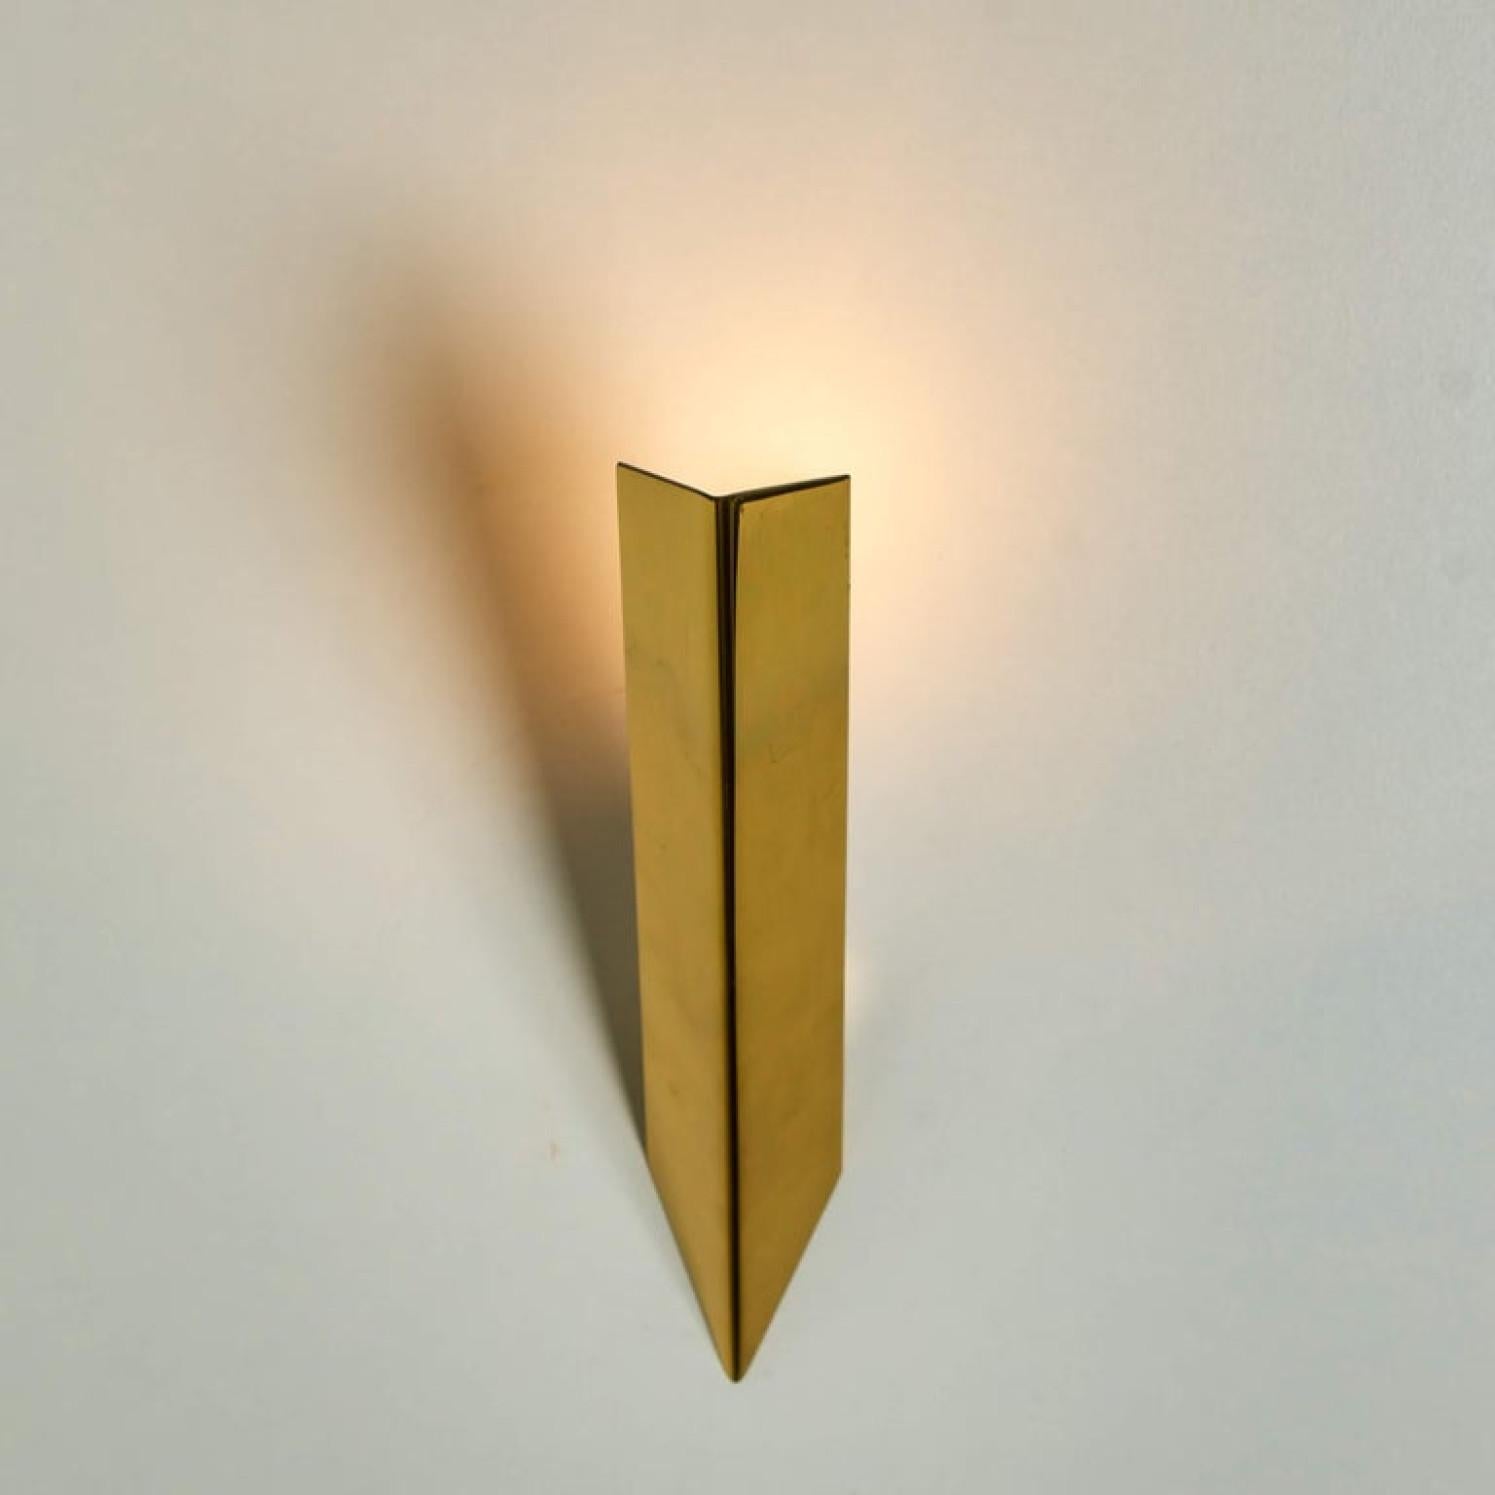 1 of the 2 Pair of Wedge-Shaped High End Wall Lights by J.T. Kalmar, 1970s For Sale 1